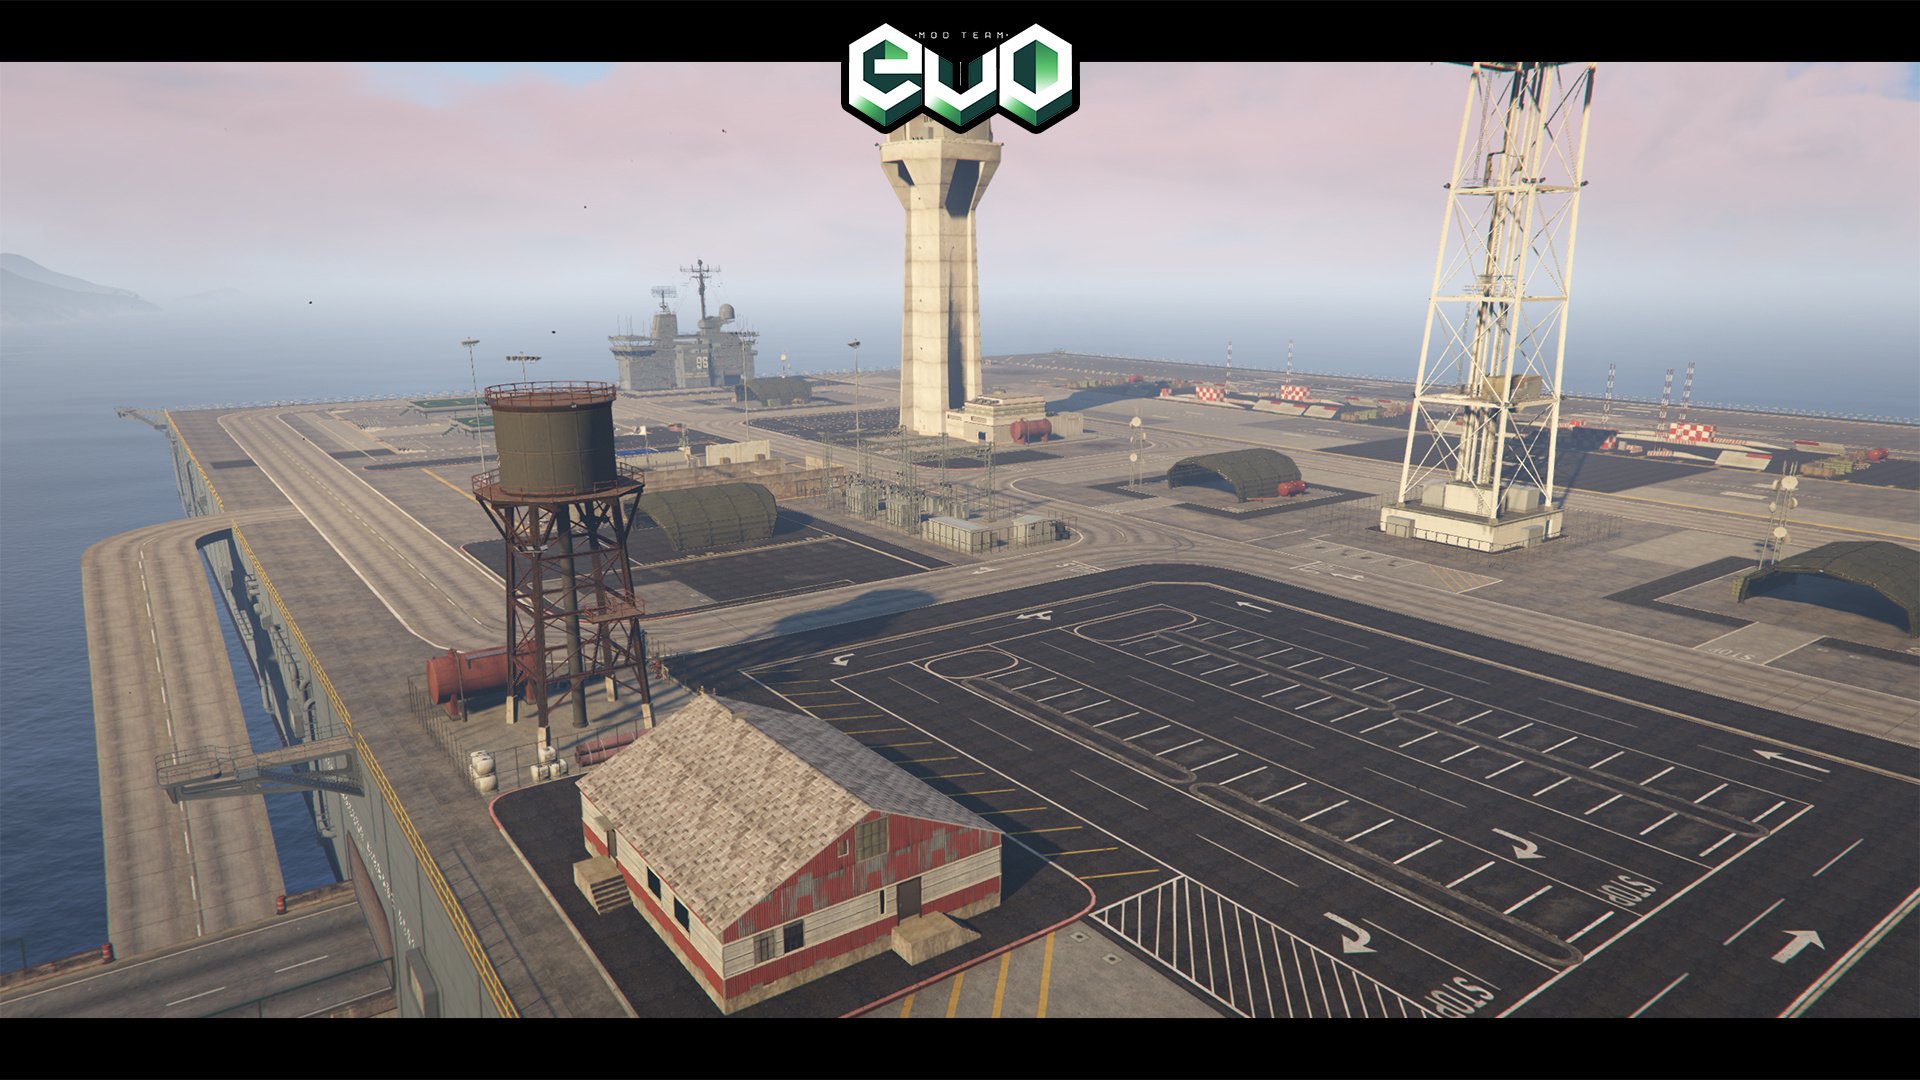 GTA 5 Military Base Location, Map and How to Access Fort Zancudo